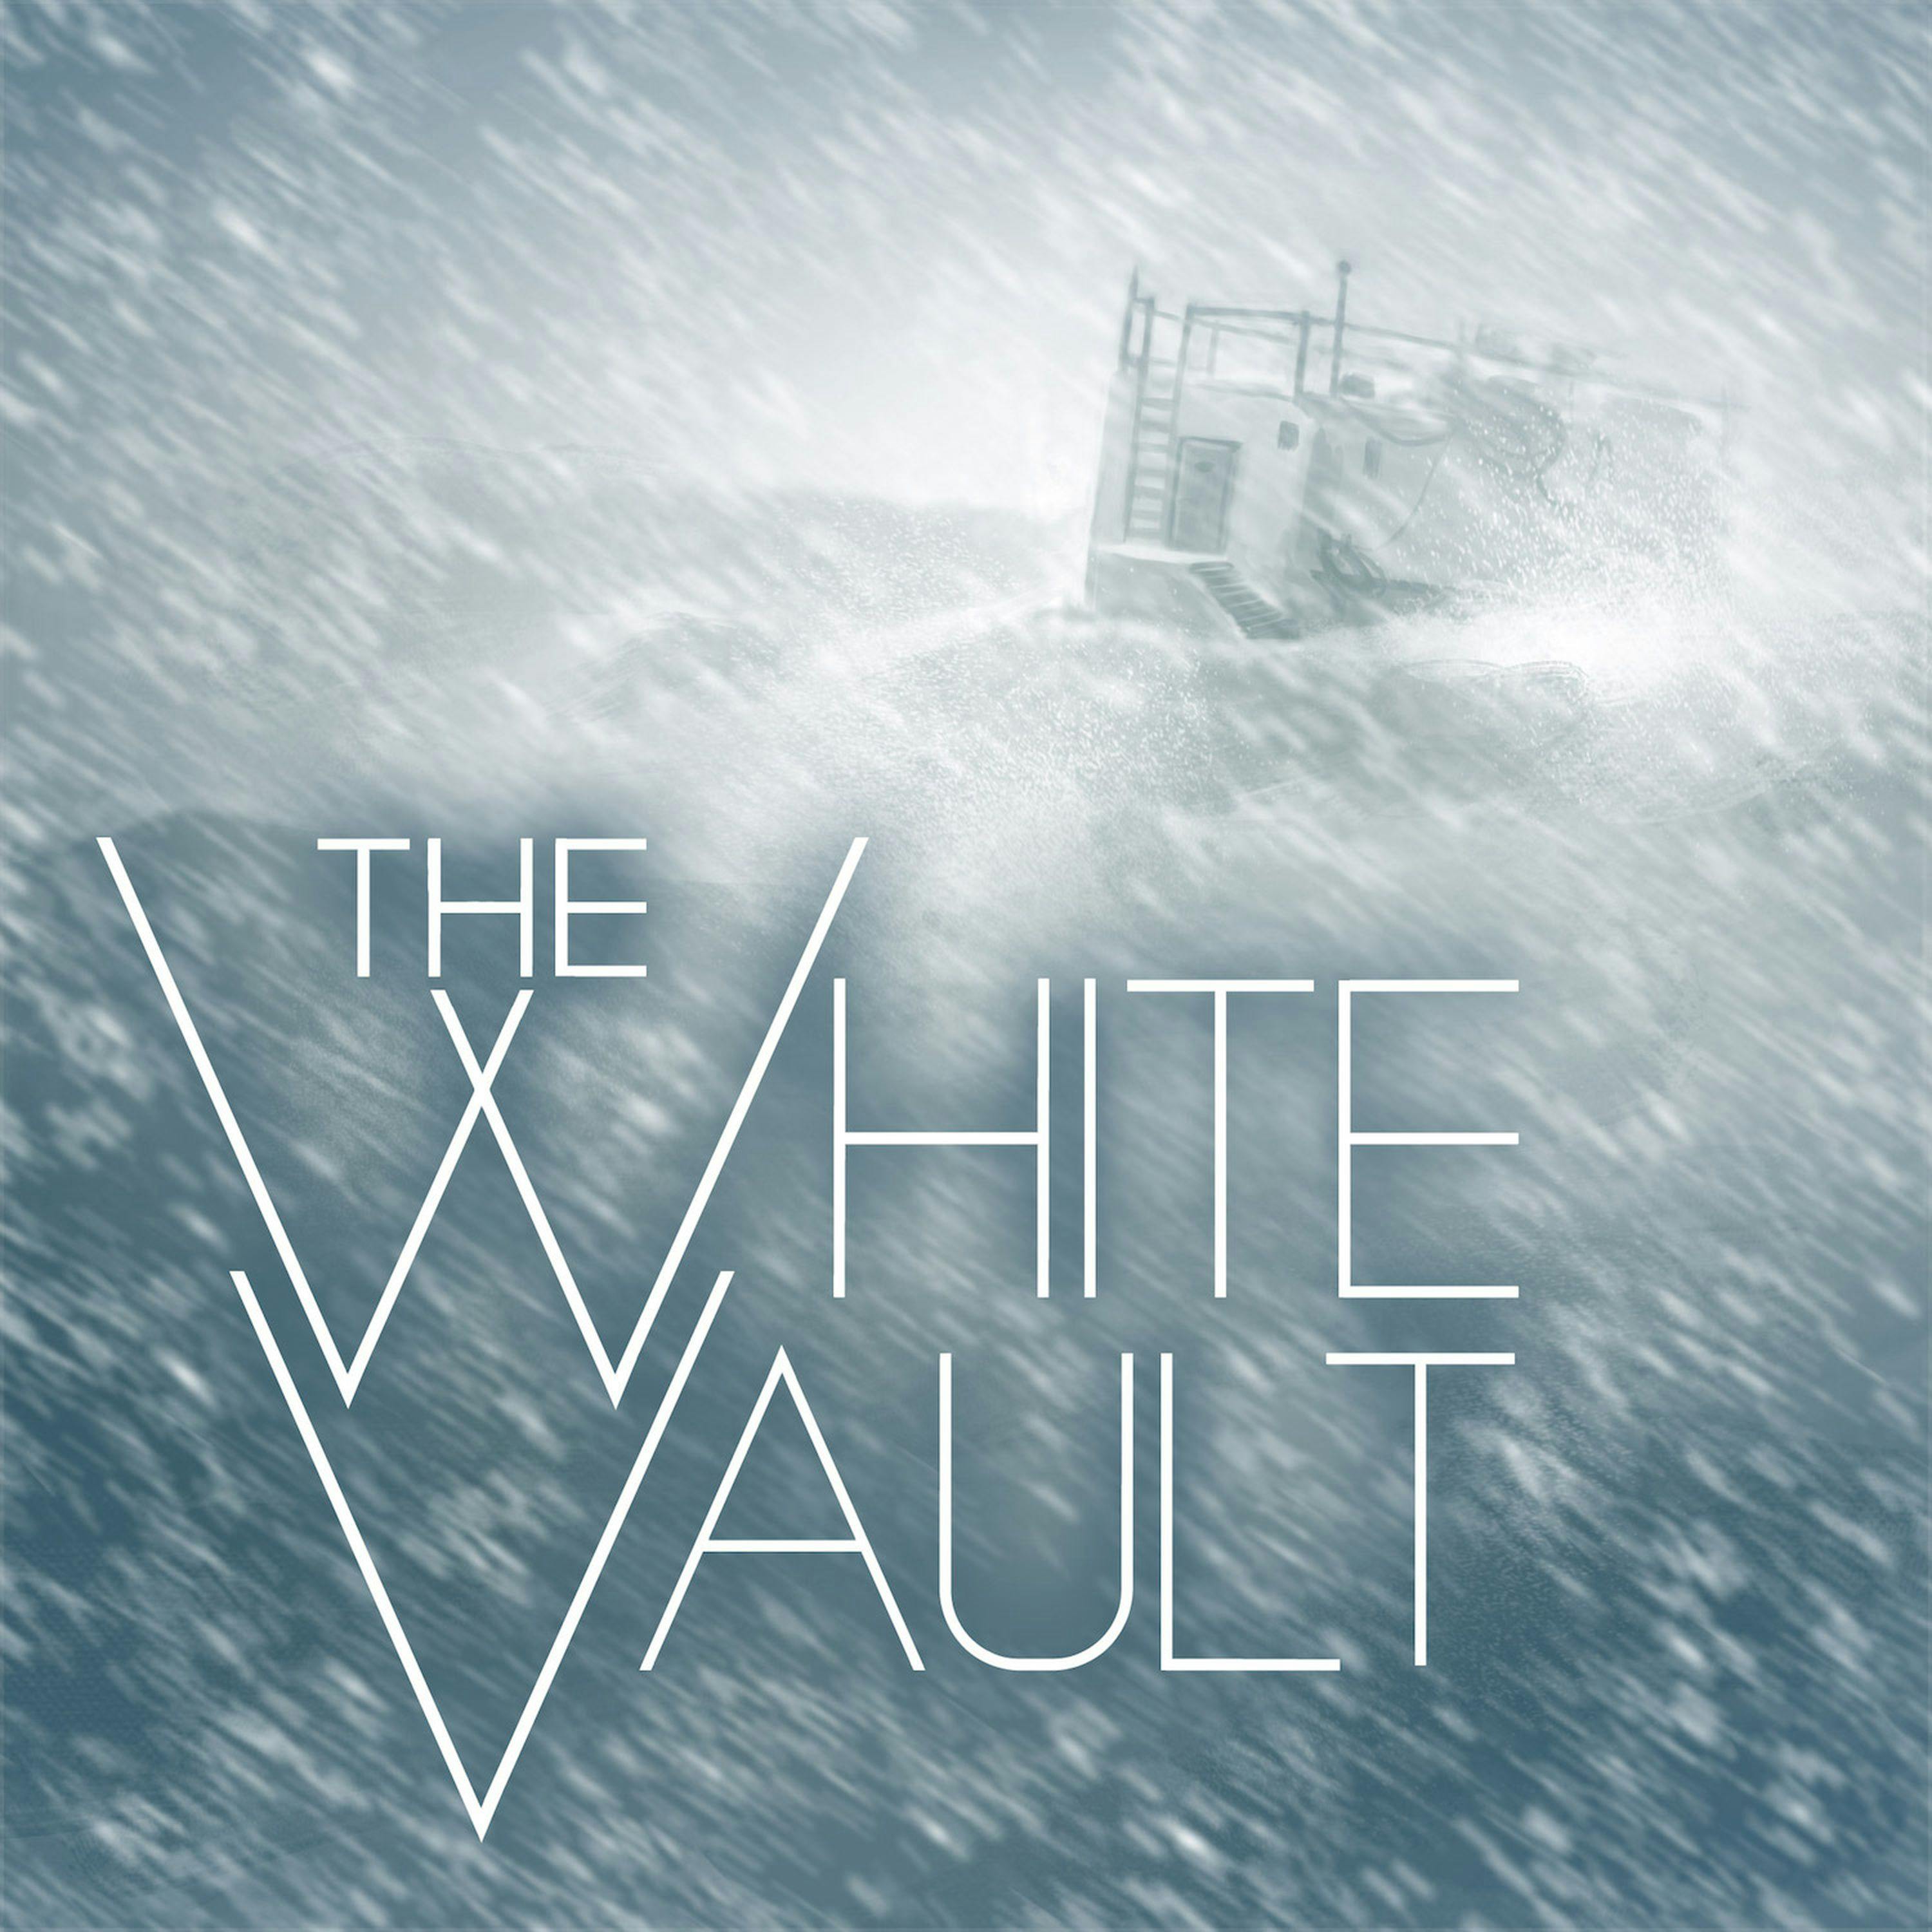 The White Vault: Indications